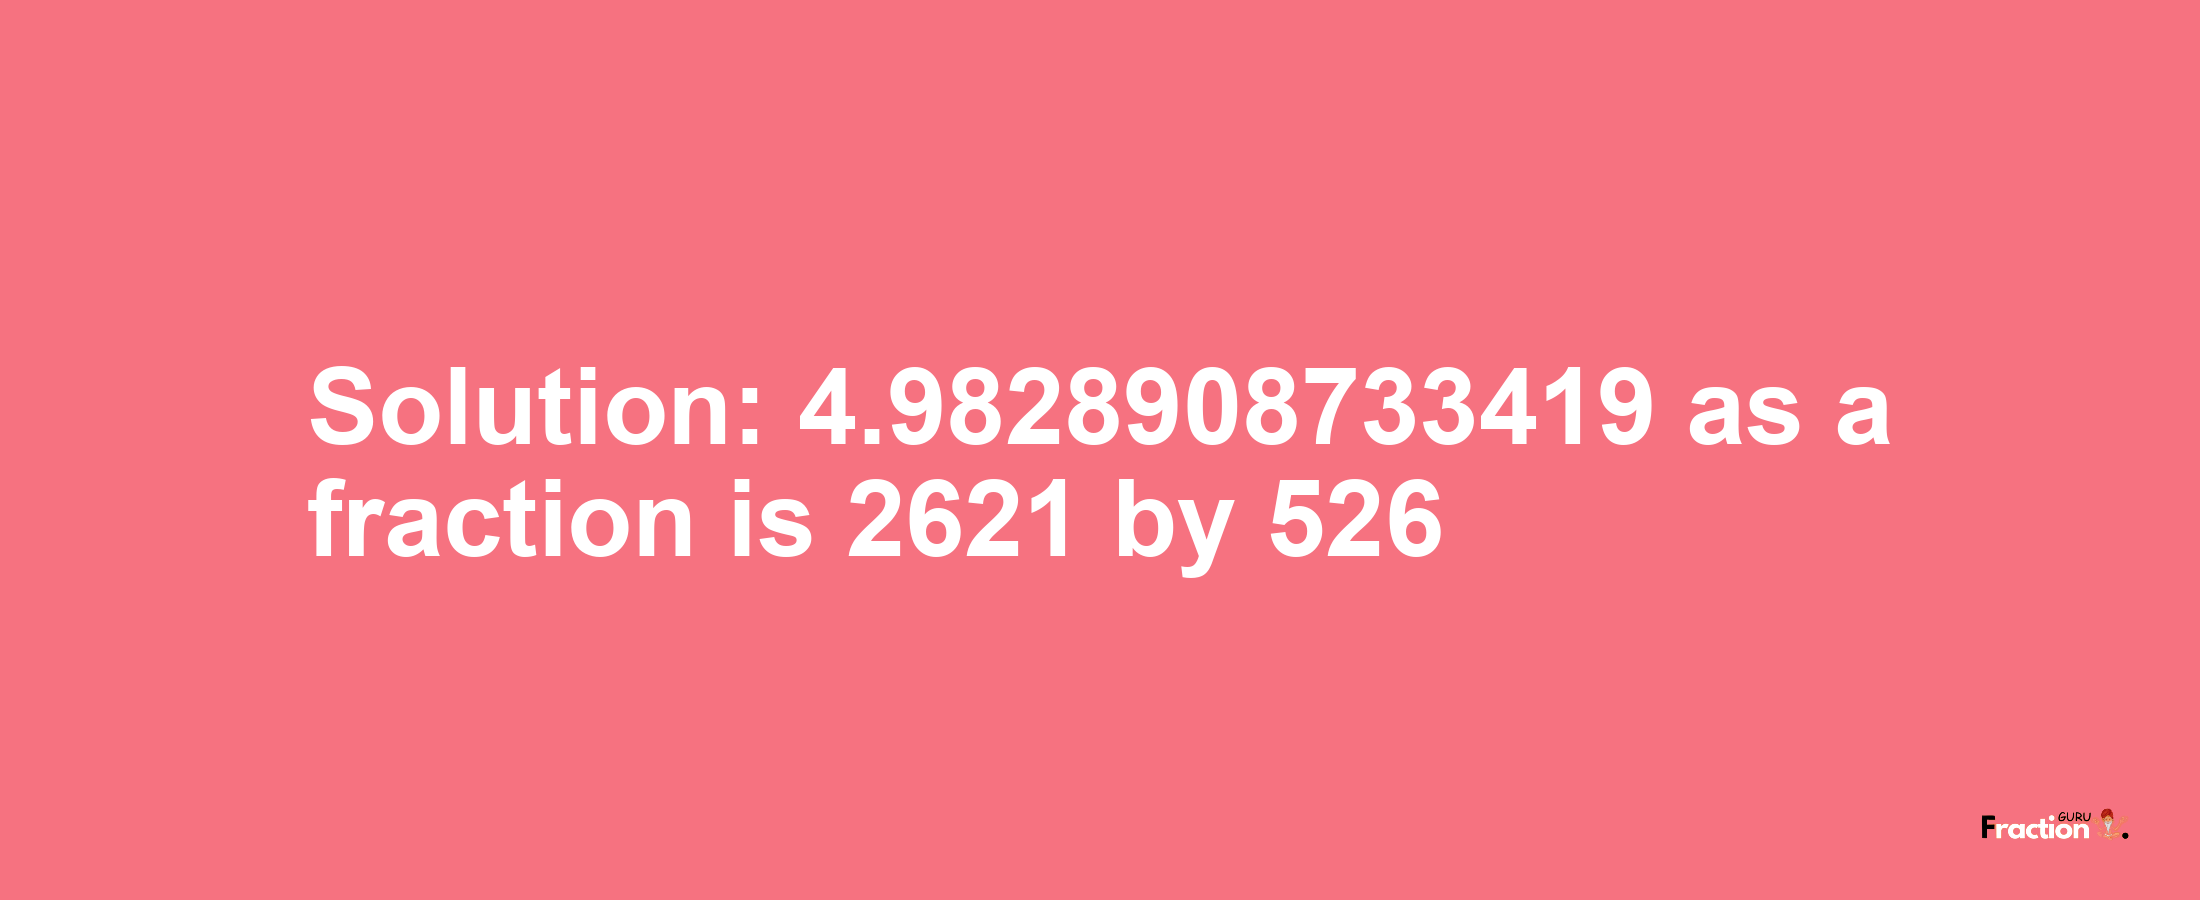 Solution:4.9828908733419 as a fraction is 2621/526